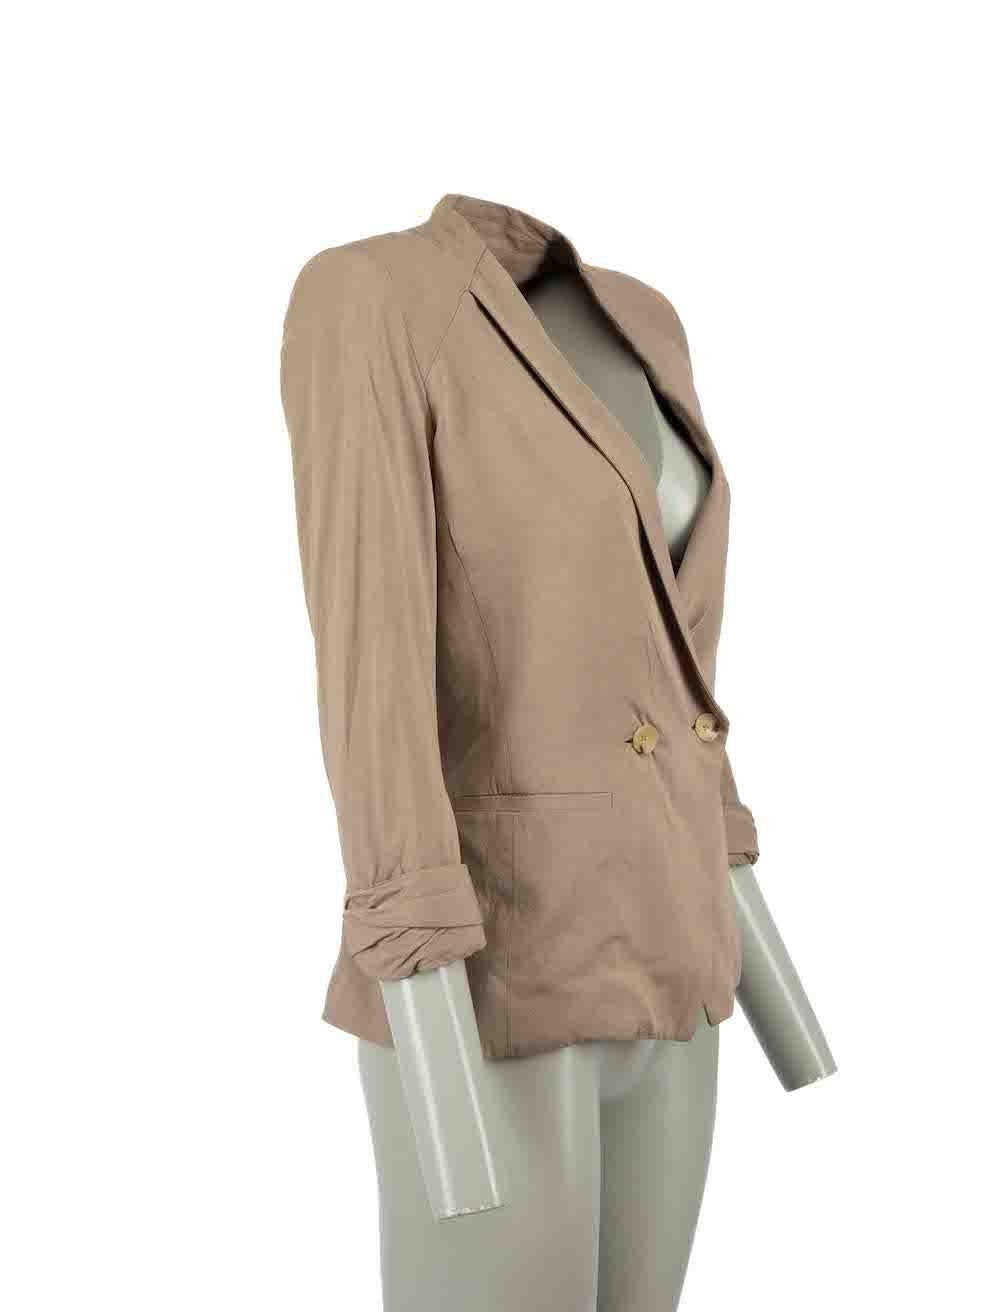 CONDITION is Very good. Minimal wear to blazer is evident. Minimal discolouration to left arm on this used Helmut Lang designer resale item.

Details
Beige
Viscose
Blazer
Front wrap double breasted closure
Shoulder padded
2x Front side